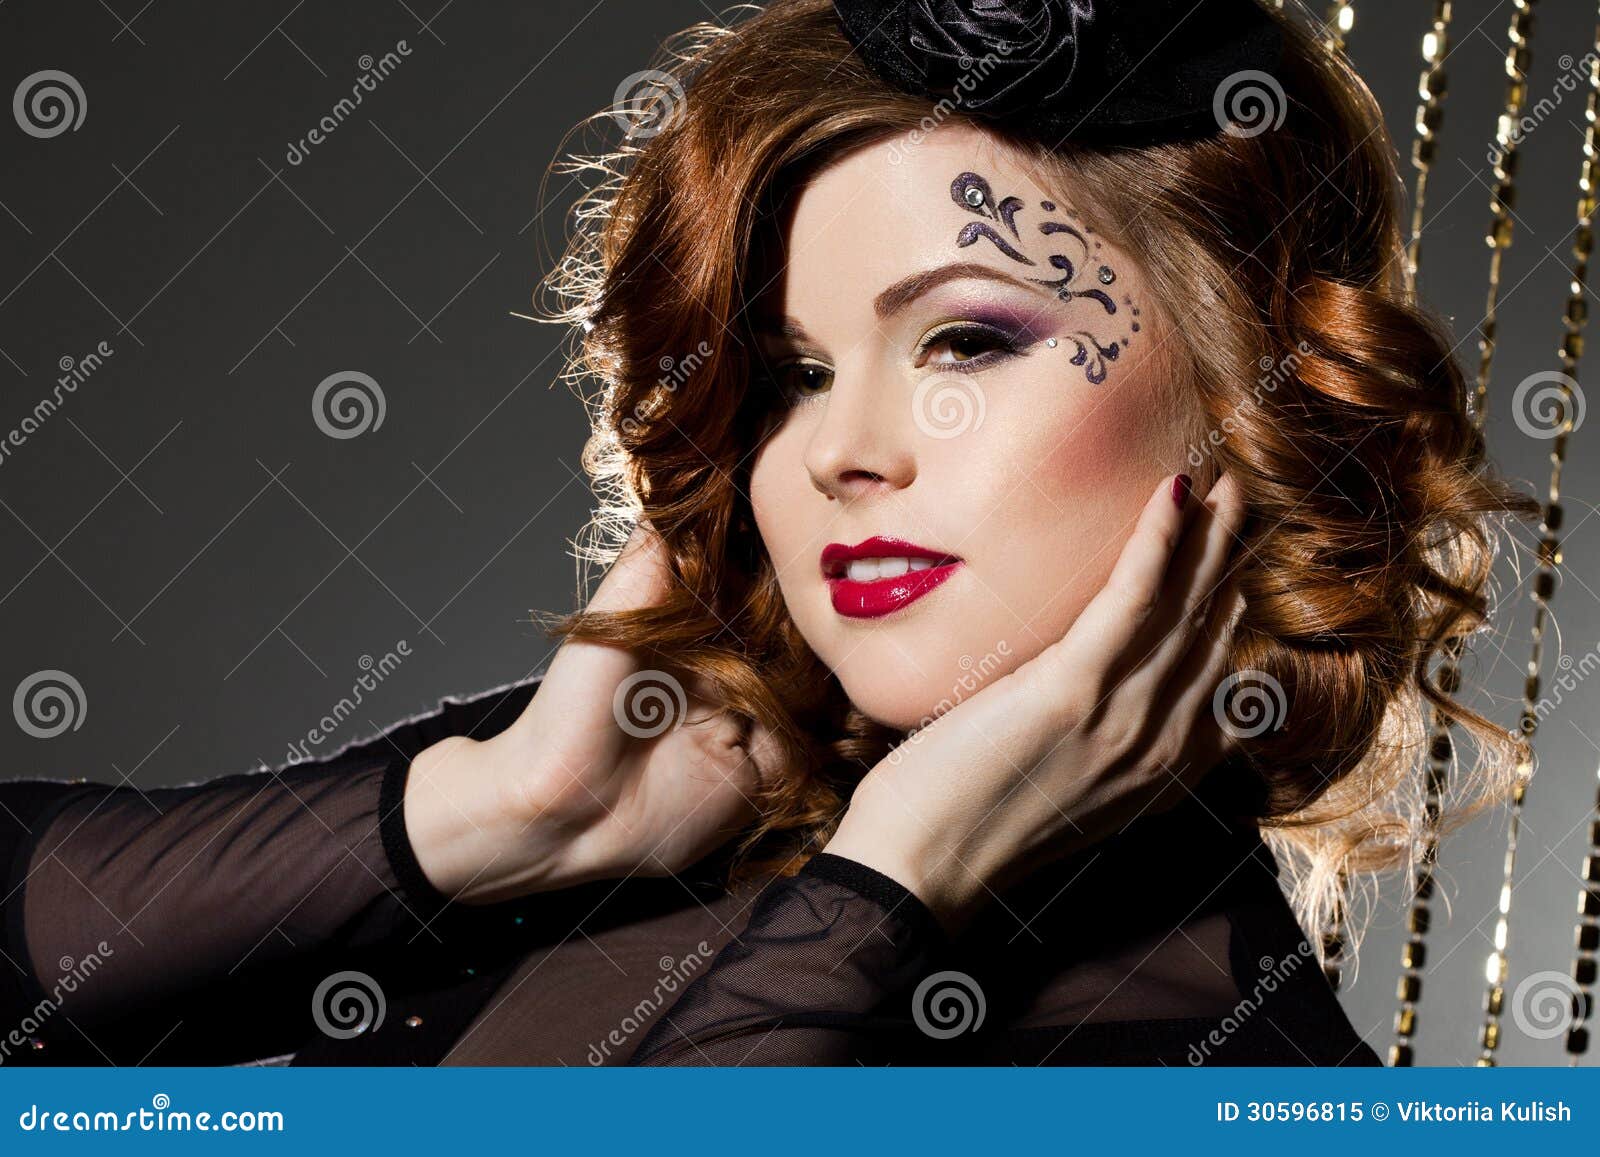 fashionable woman with art visage